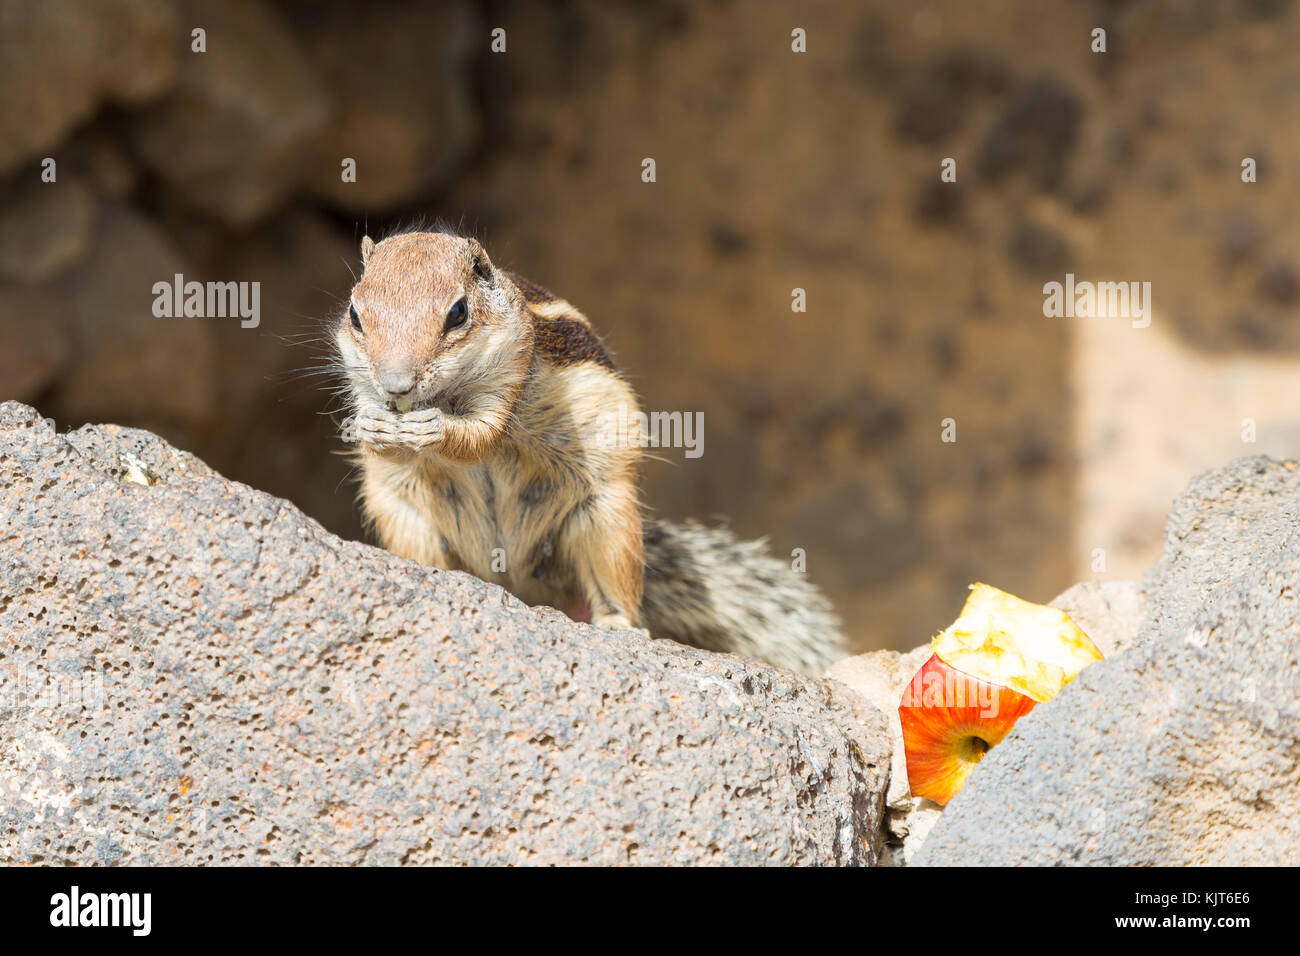 A munching squirrel holding a piece of an apple in its hands Stock Photo